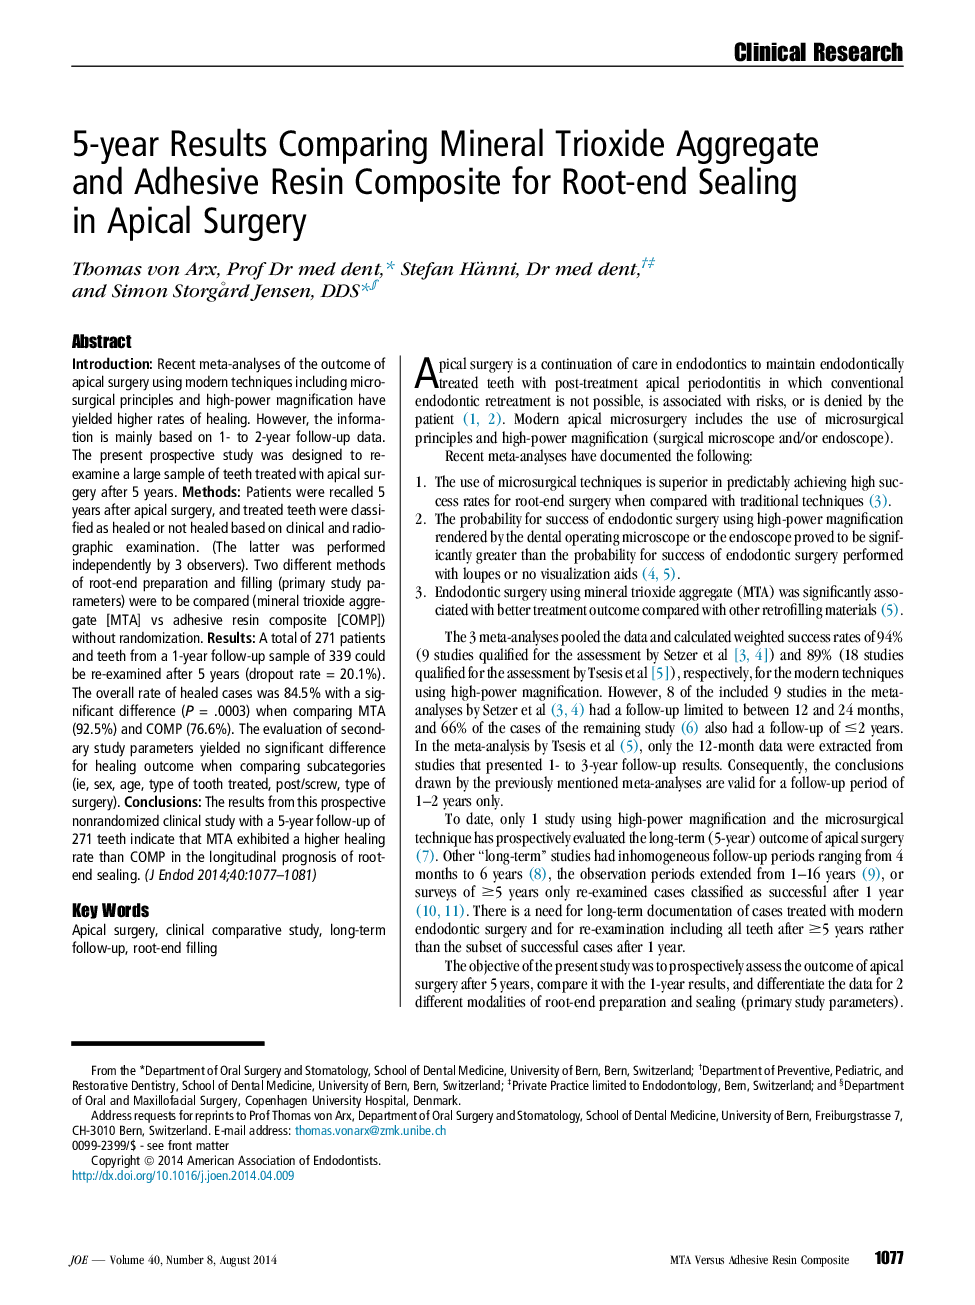 5-year Results Comparing Mineral Trioxide Aggregate andÂ Adhesive Resin Composite for Root-end Sealing inÂ ApicalÂ Surgery